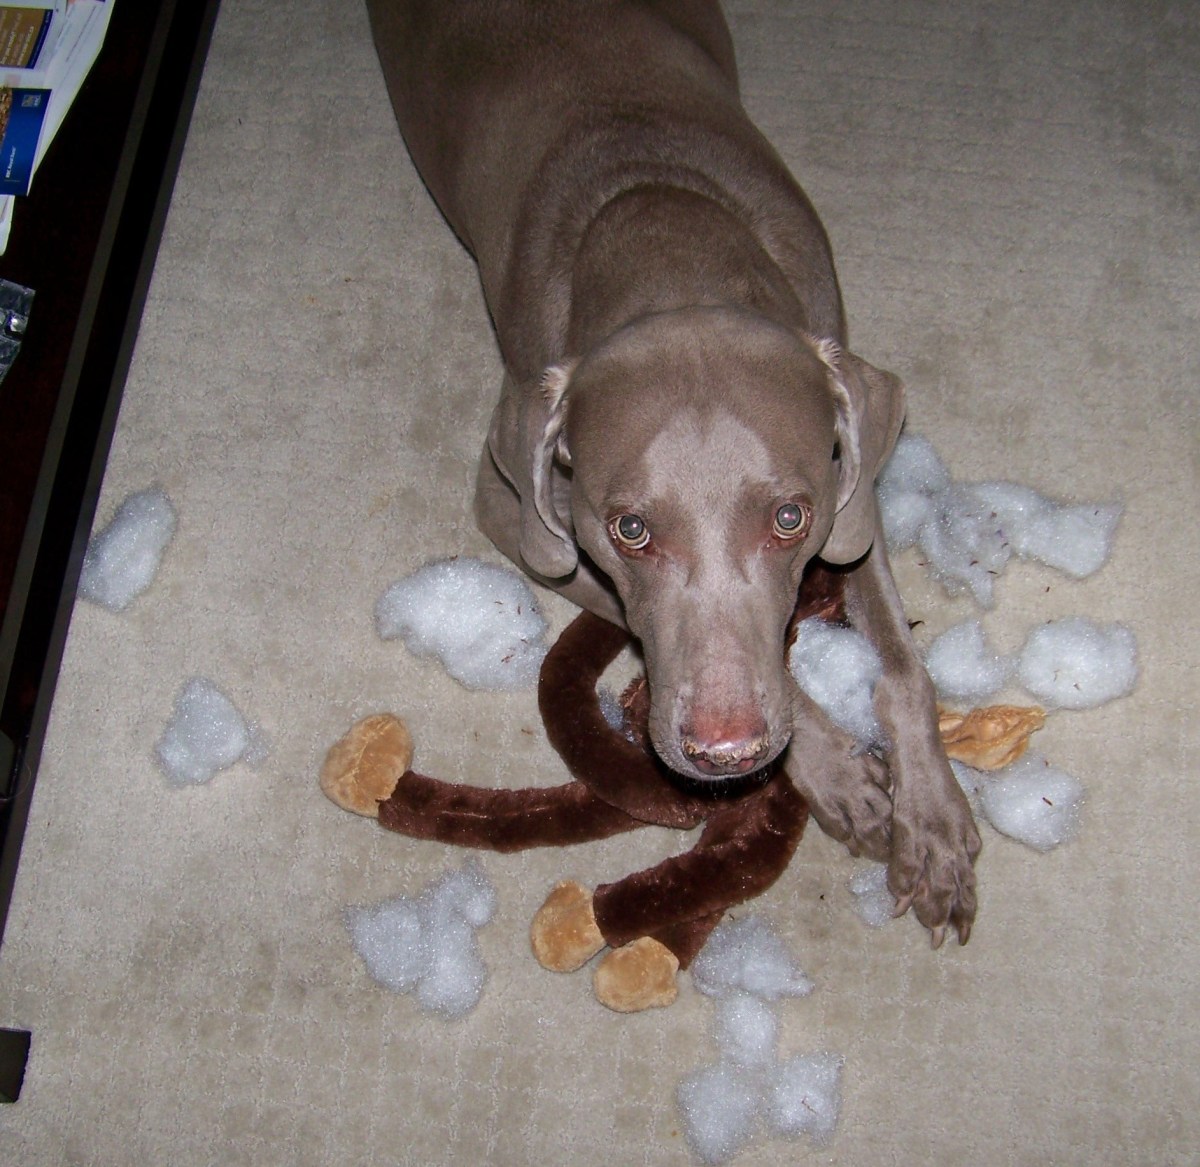 How Titan played with his monkey toy.  Clean up?! Lol, yeah right!